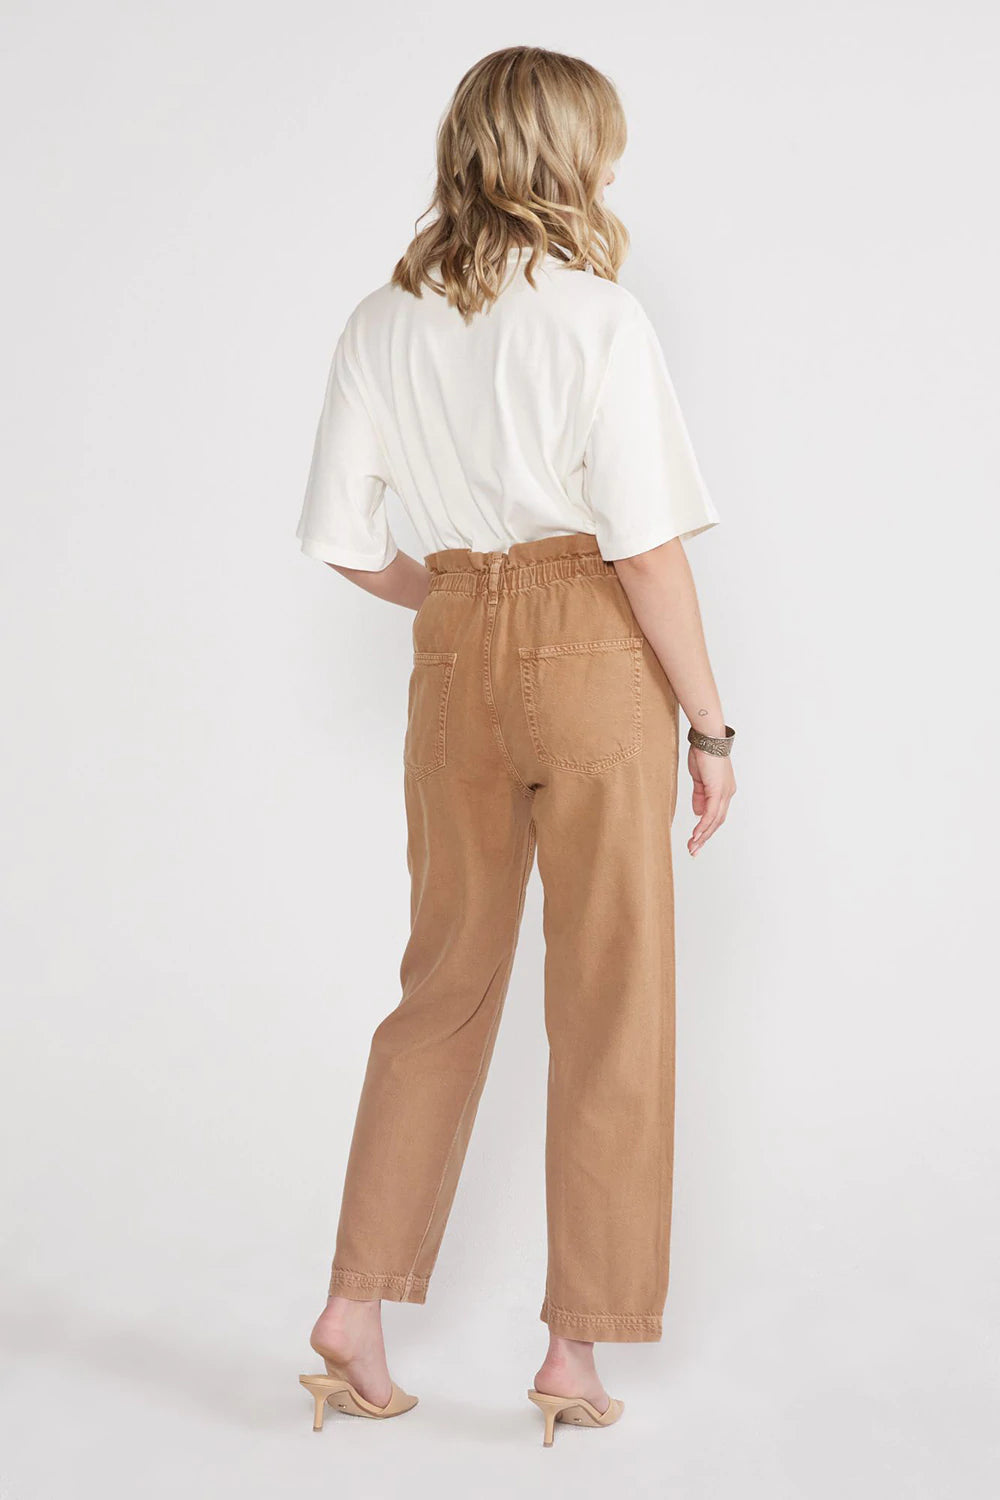 Etica – Wade Relaxed Trouser in Vintage Tawny Brown